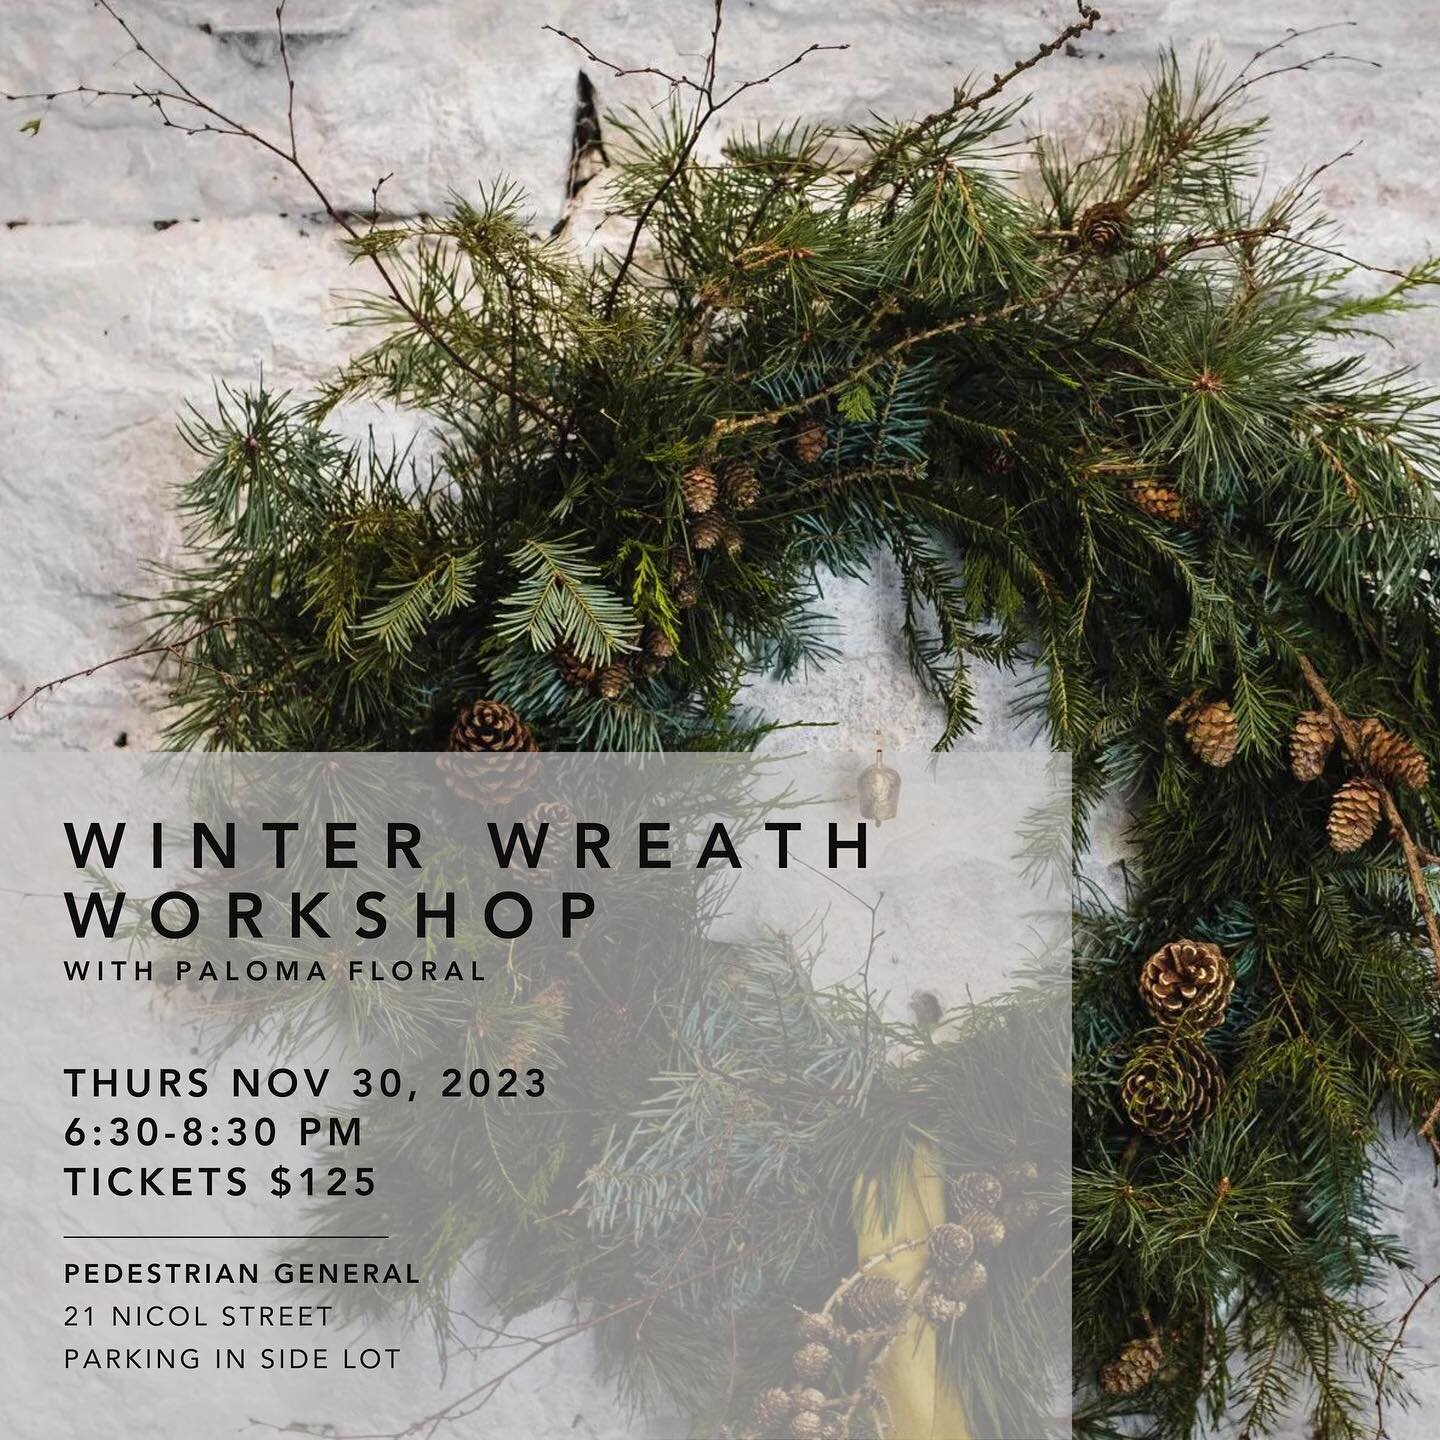 I&rsquo;m so excited about this wreath workshop at @pedestriangeneral - it will be my first ever workshop in Nanaimo! This is a really cool space, I hope you can join us ☺️🎄

Tickets are available via the Pedestrian General website: www.pedestriange